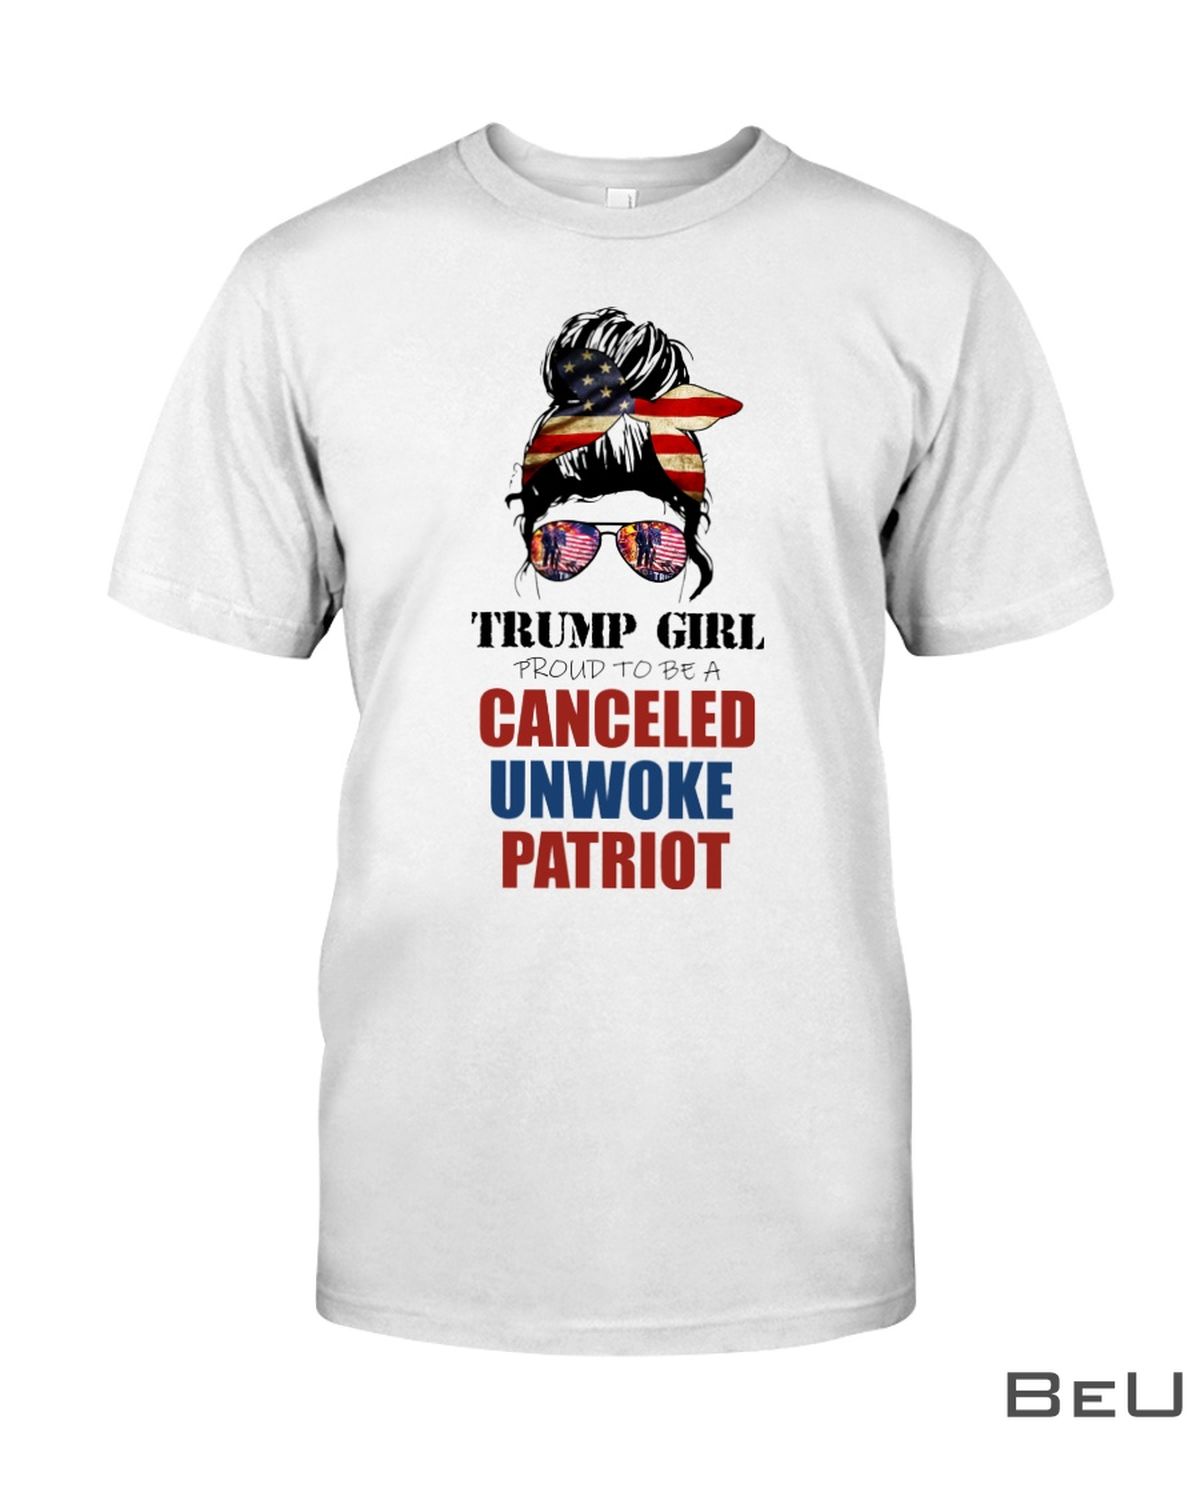 Trump-Girl-Proud-To-Be-A-Canceled-Unwoke-Patriot-Shirt